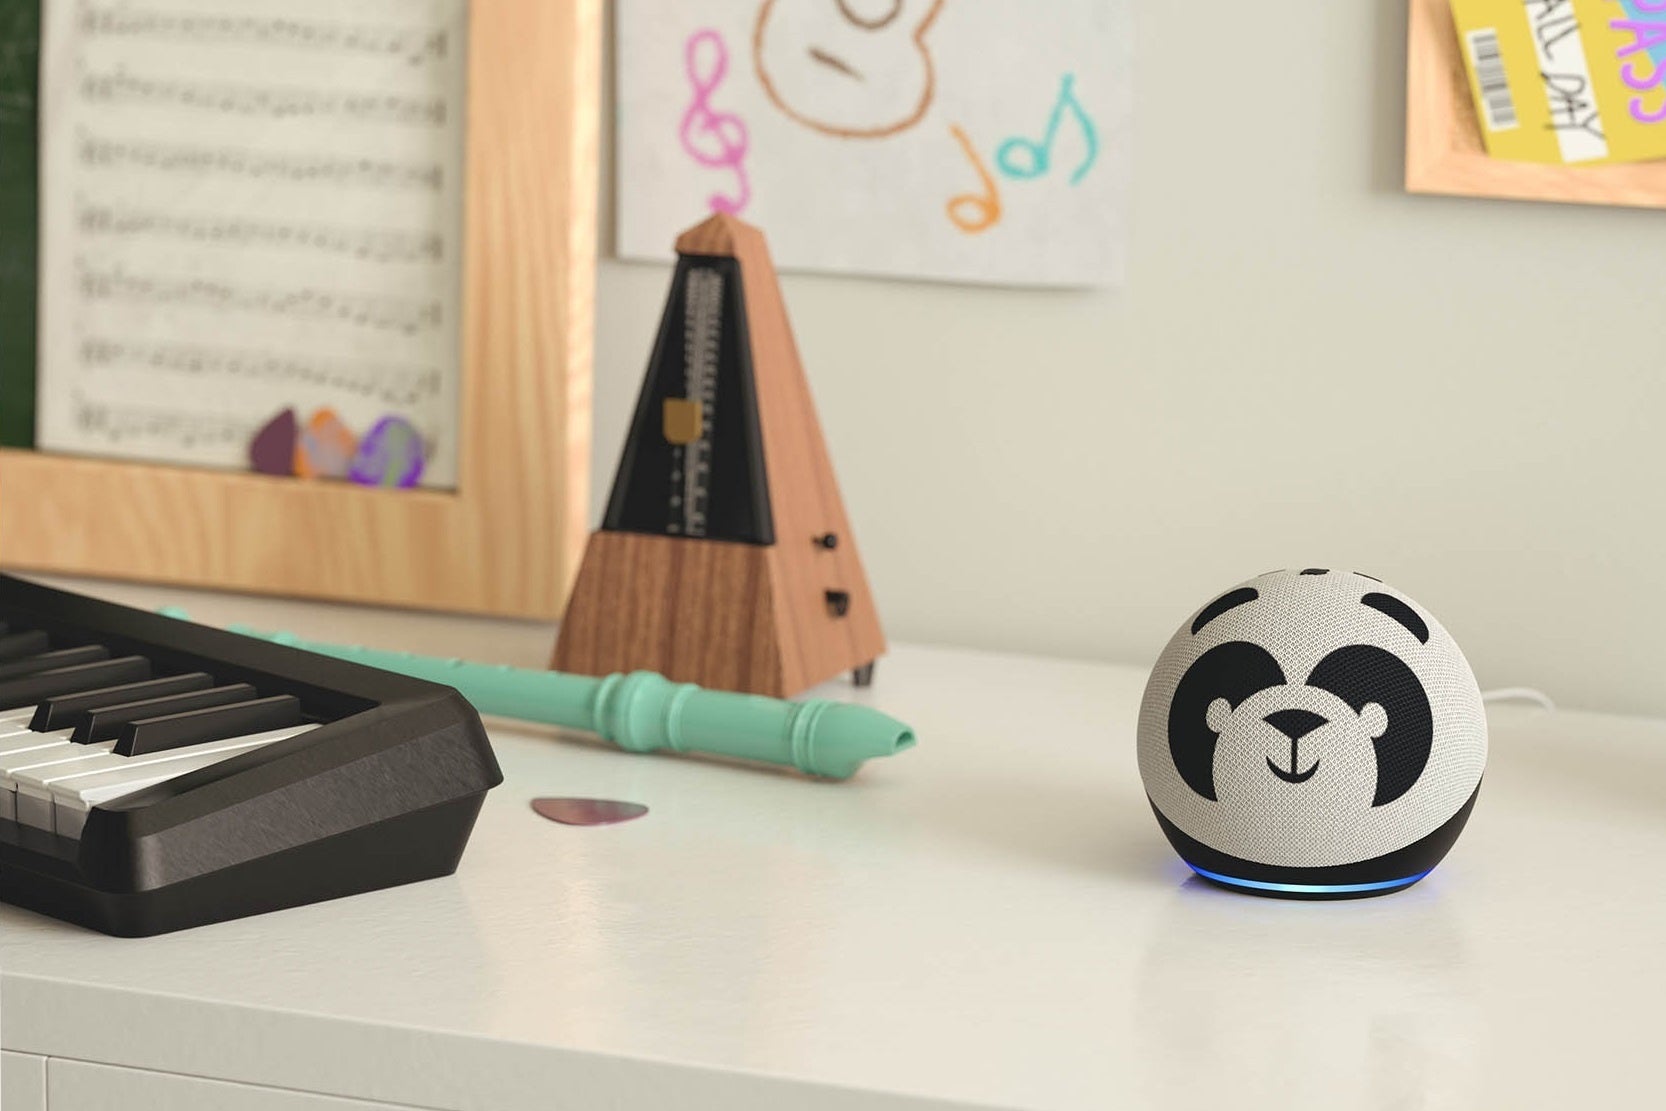 This variant of the Amazon Echo Dot was clearly designed to entertain and help children - Do you need a smart speaker like the Amazon Echo?